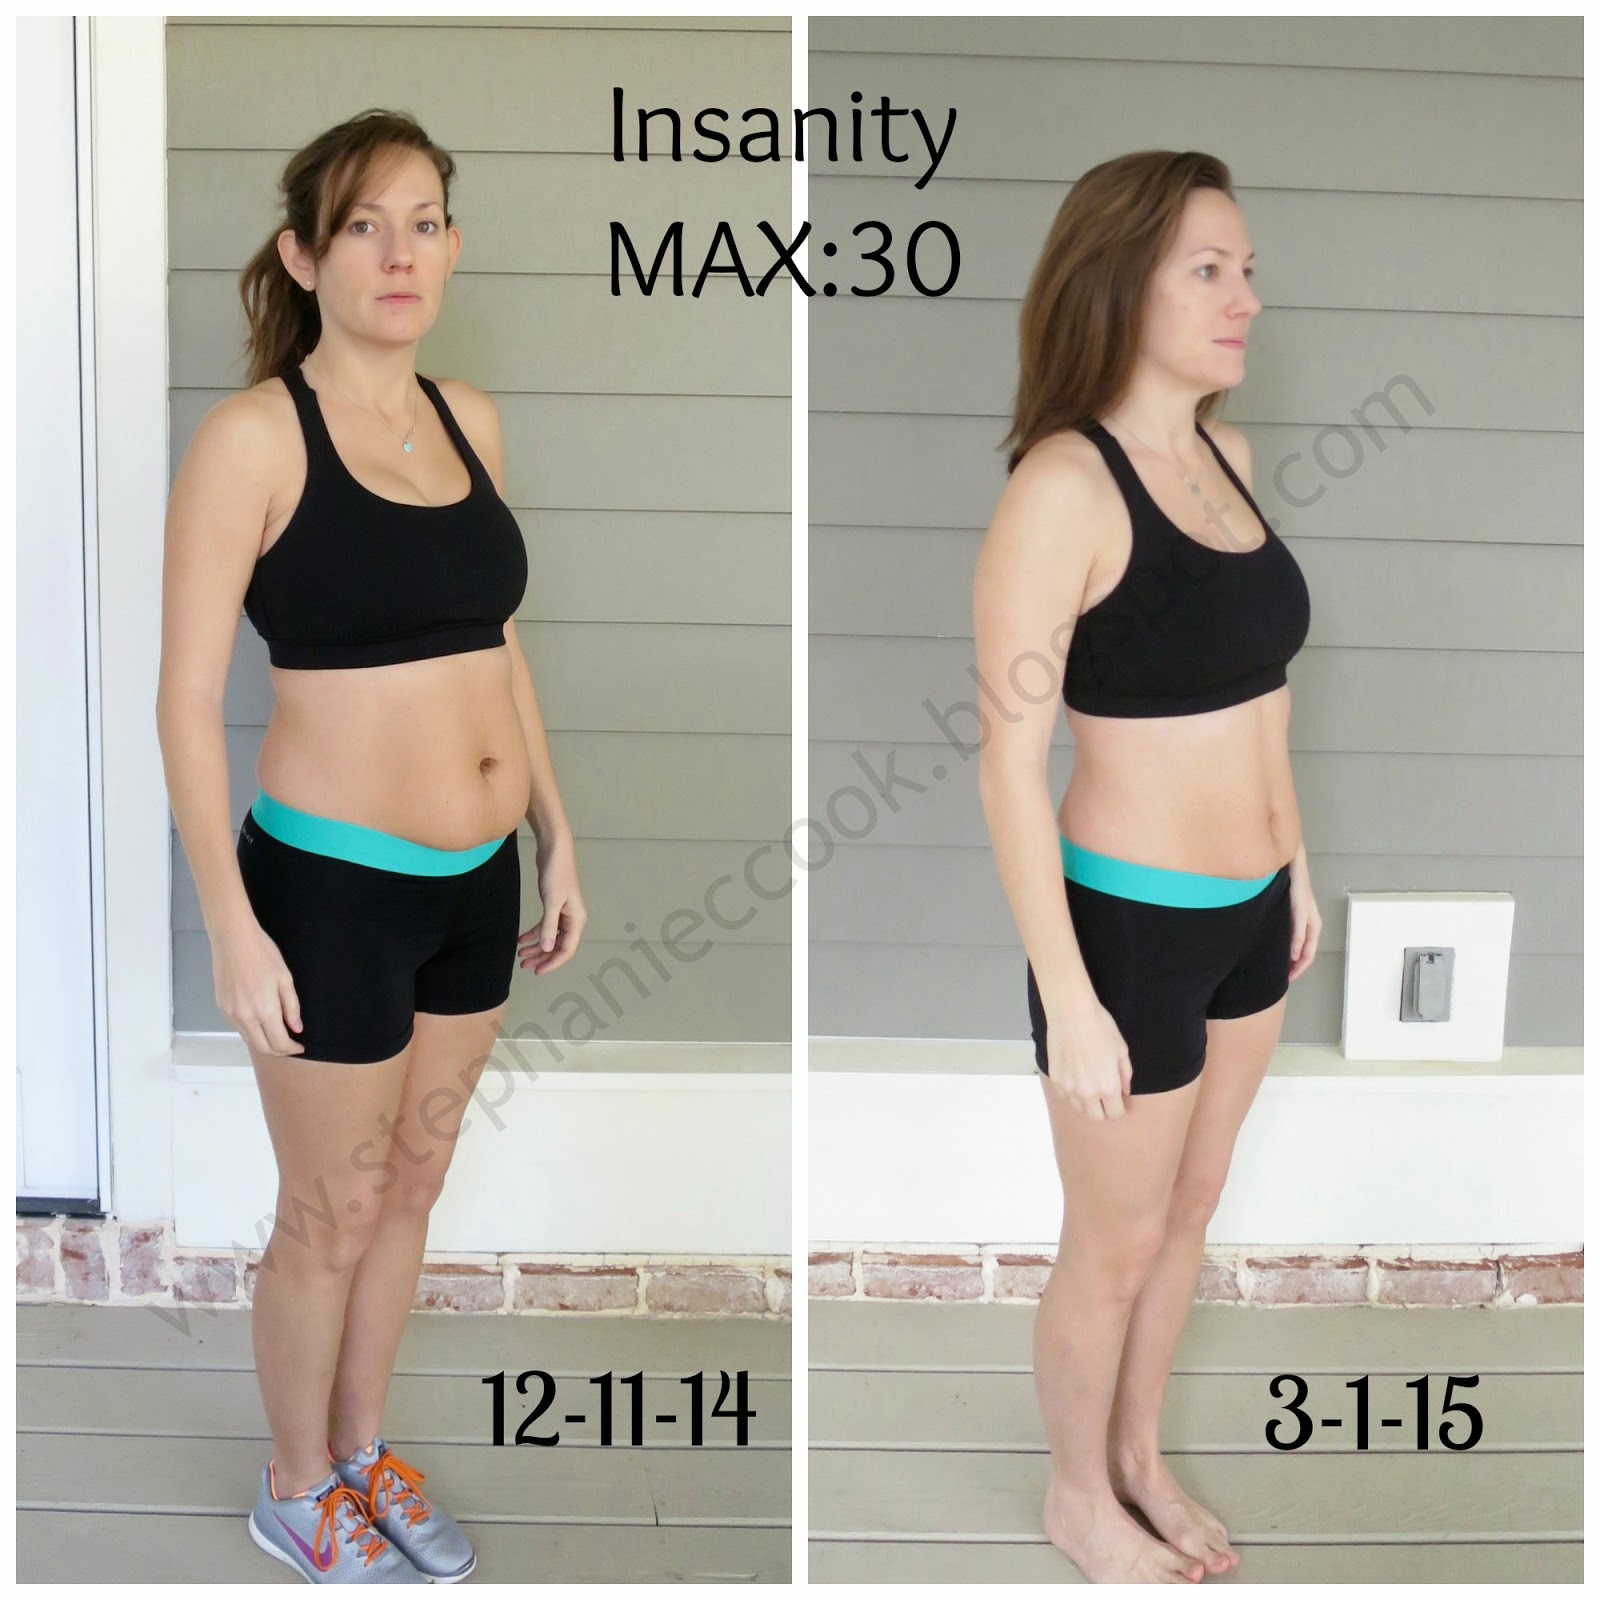 Insanity max:30 transformation male, month 2